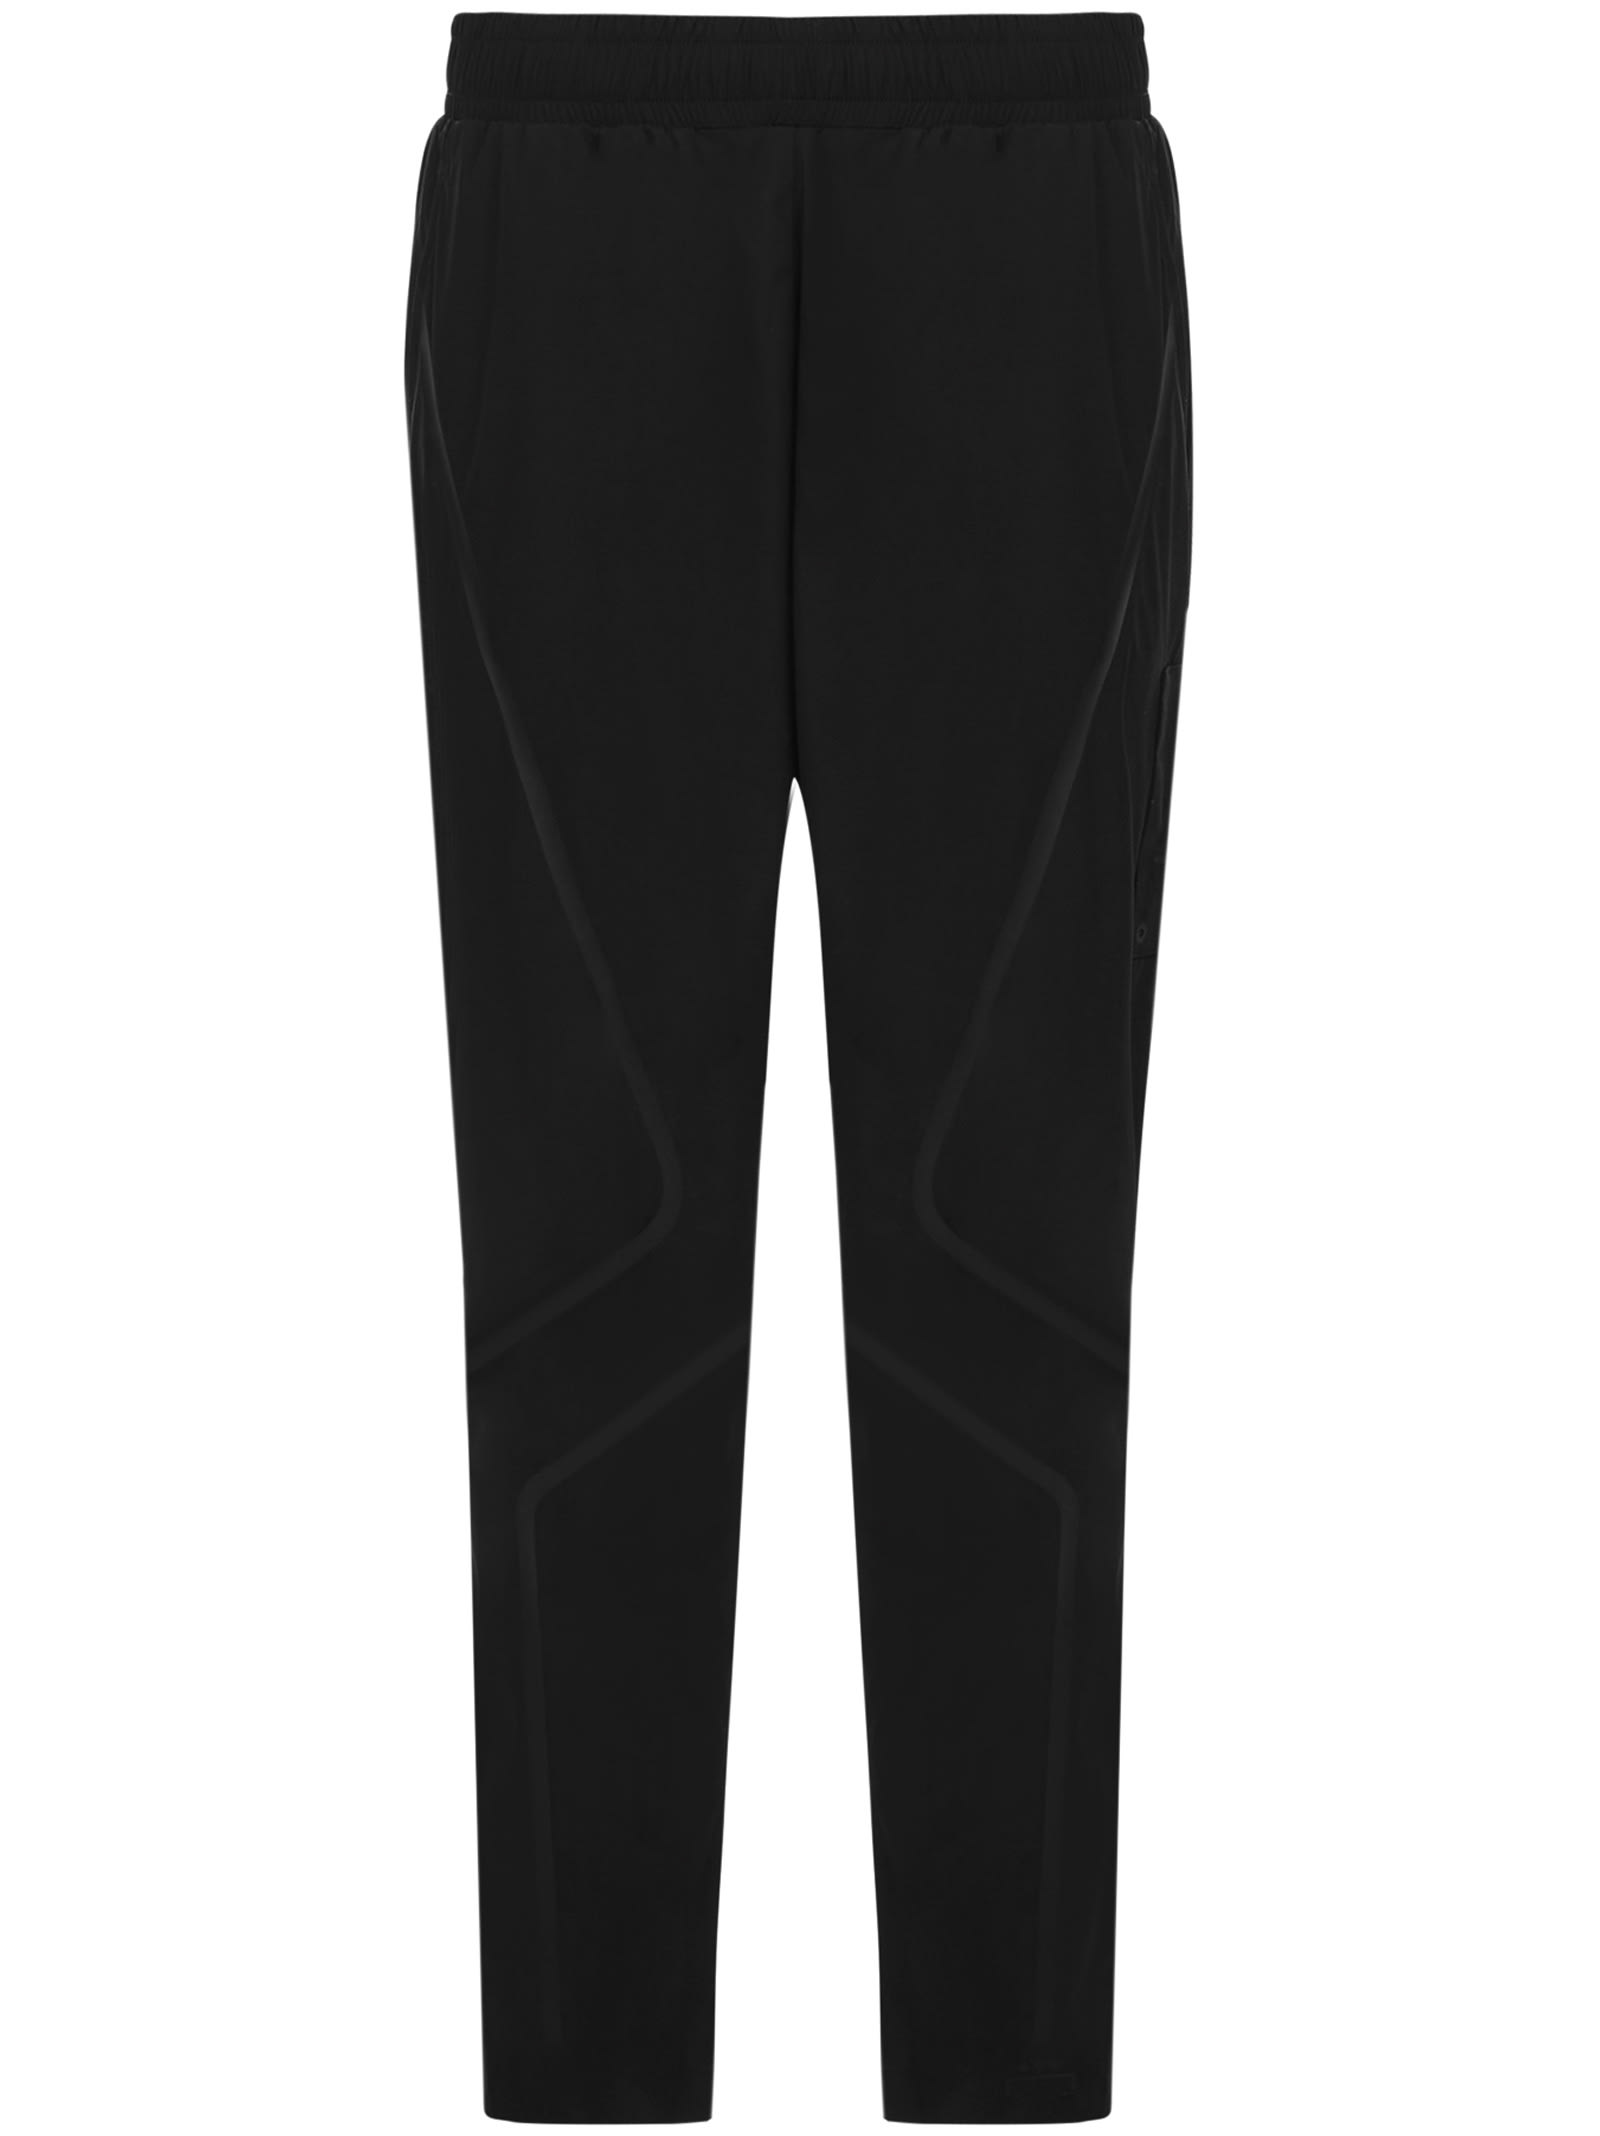 A-COLD-WALL A Cold Wall Trousers